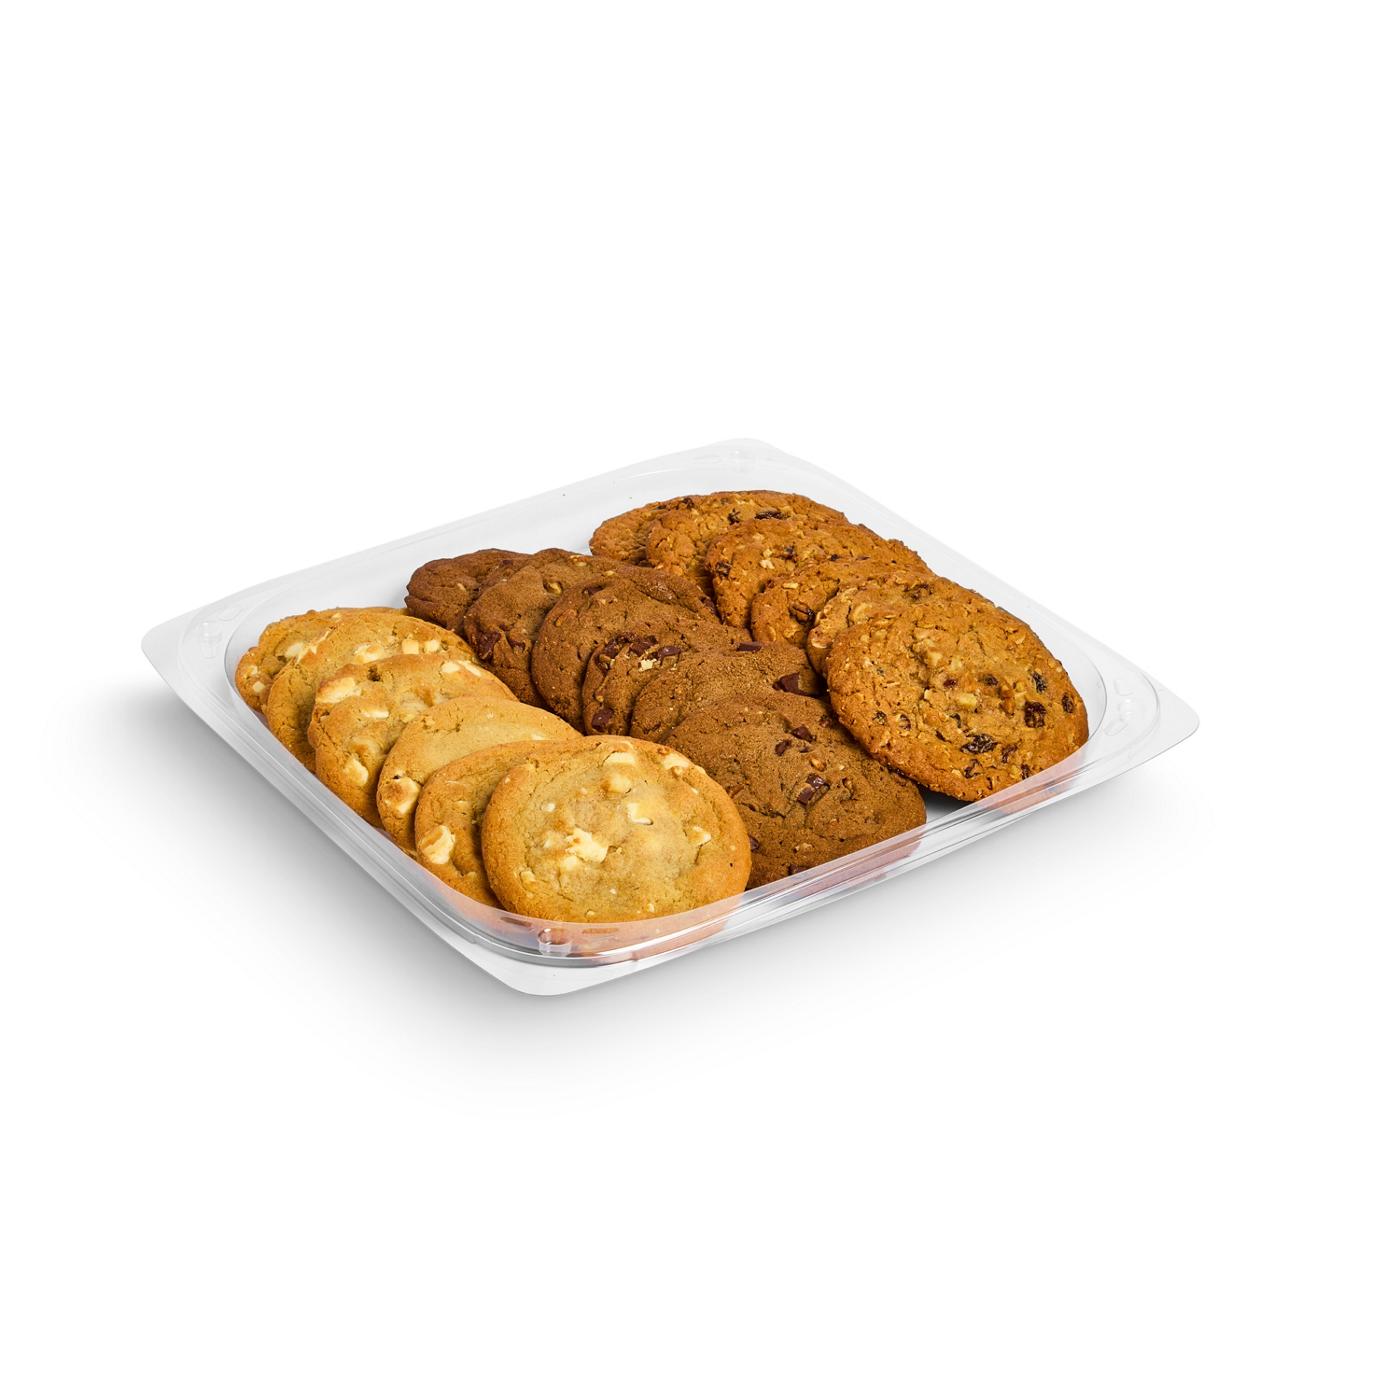 H-E-B Bakery Party Tray - Assorted Gourmet Cookies; image 3 of 3